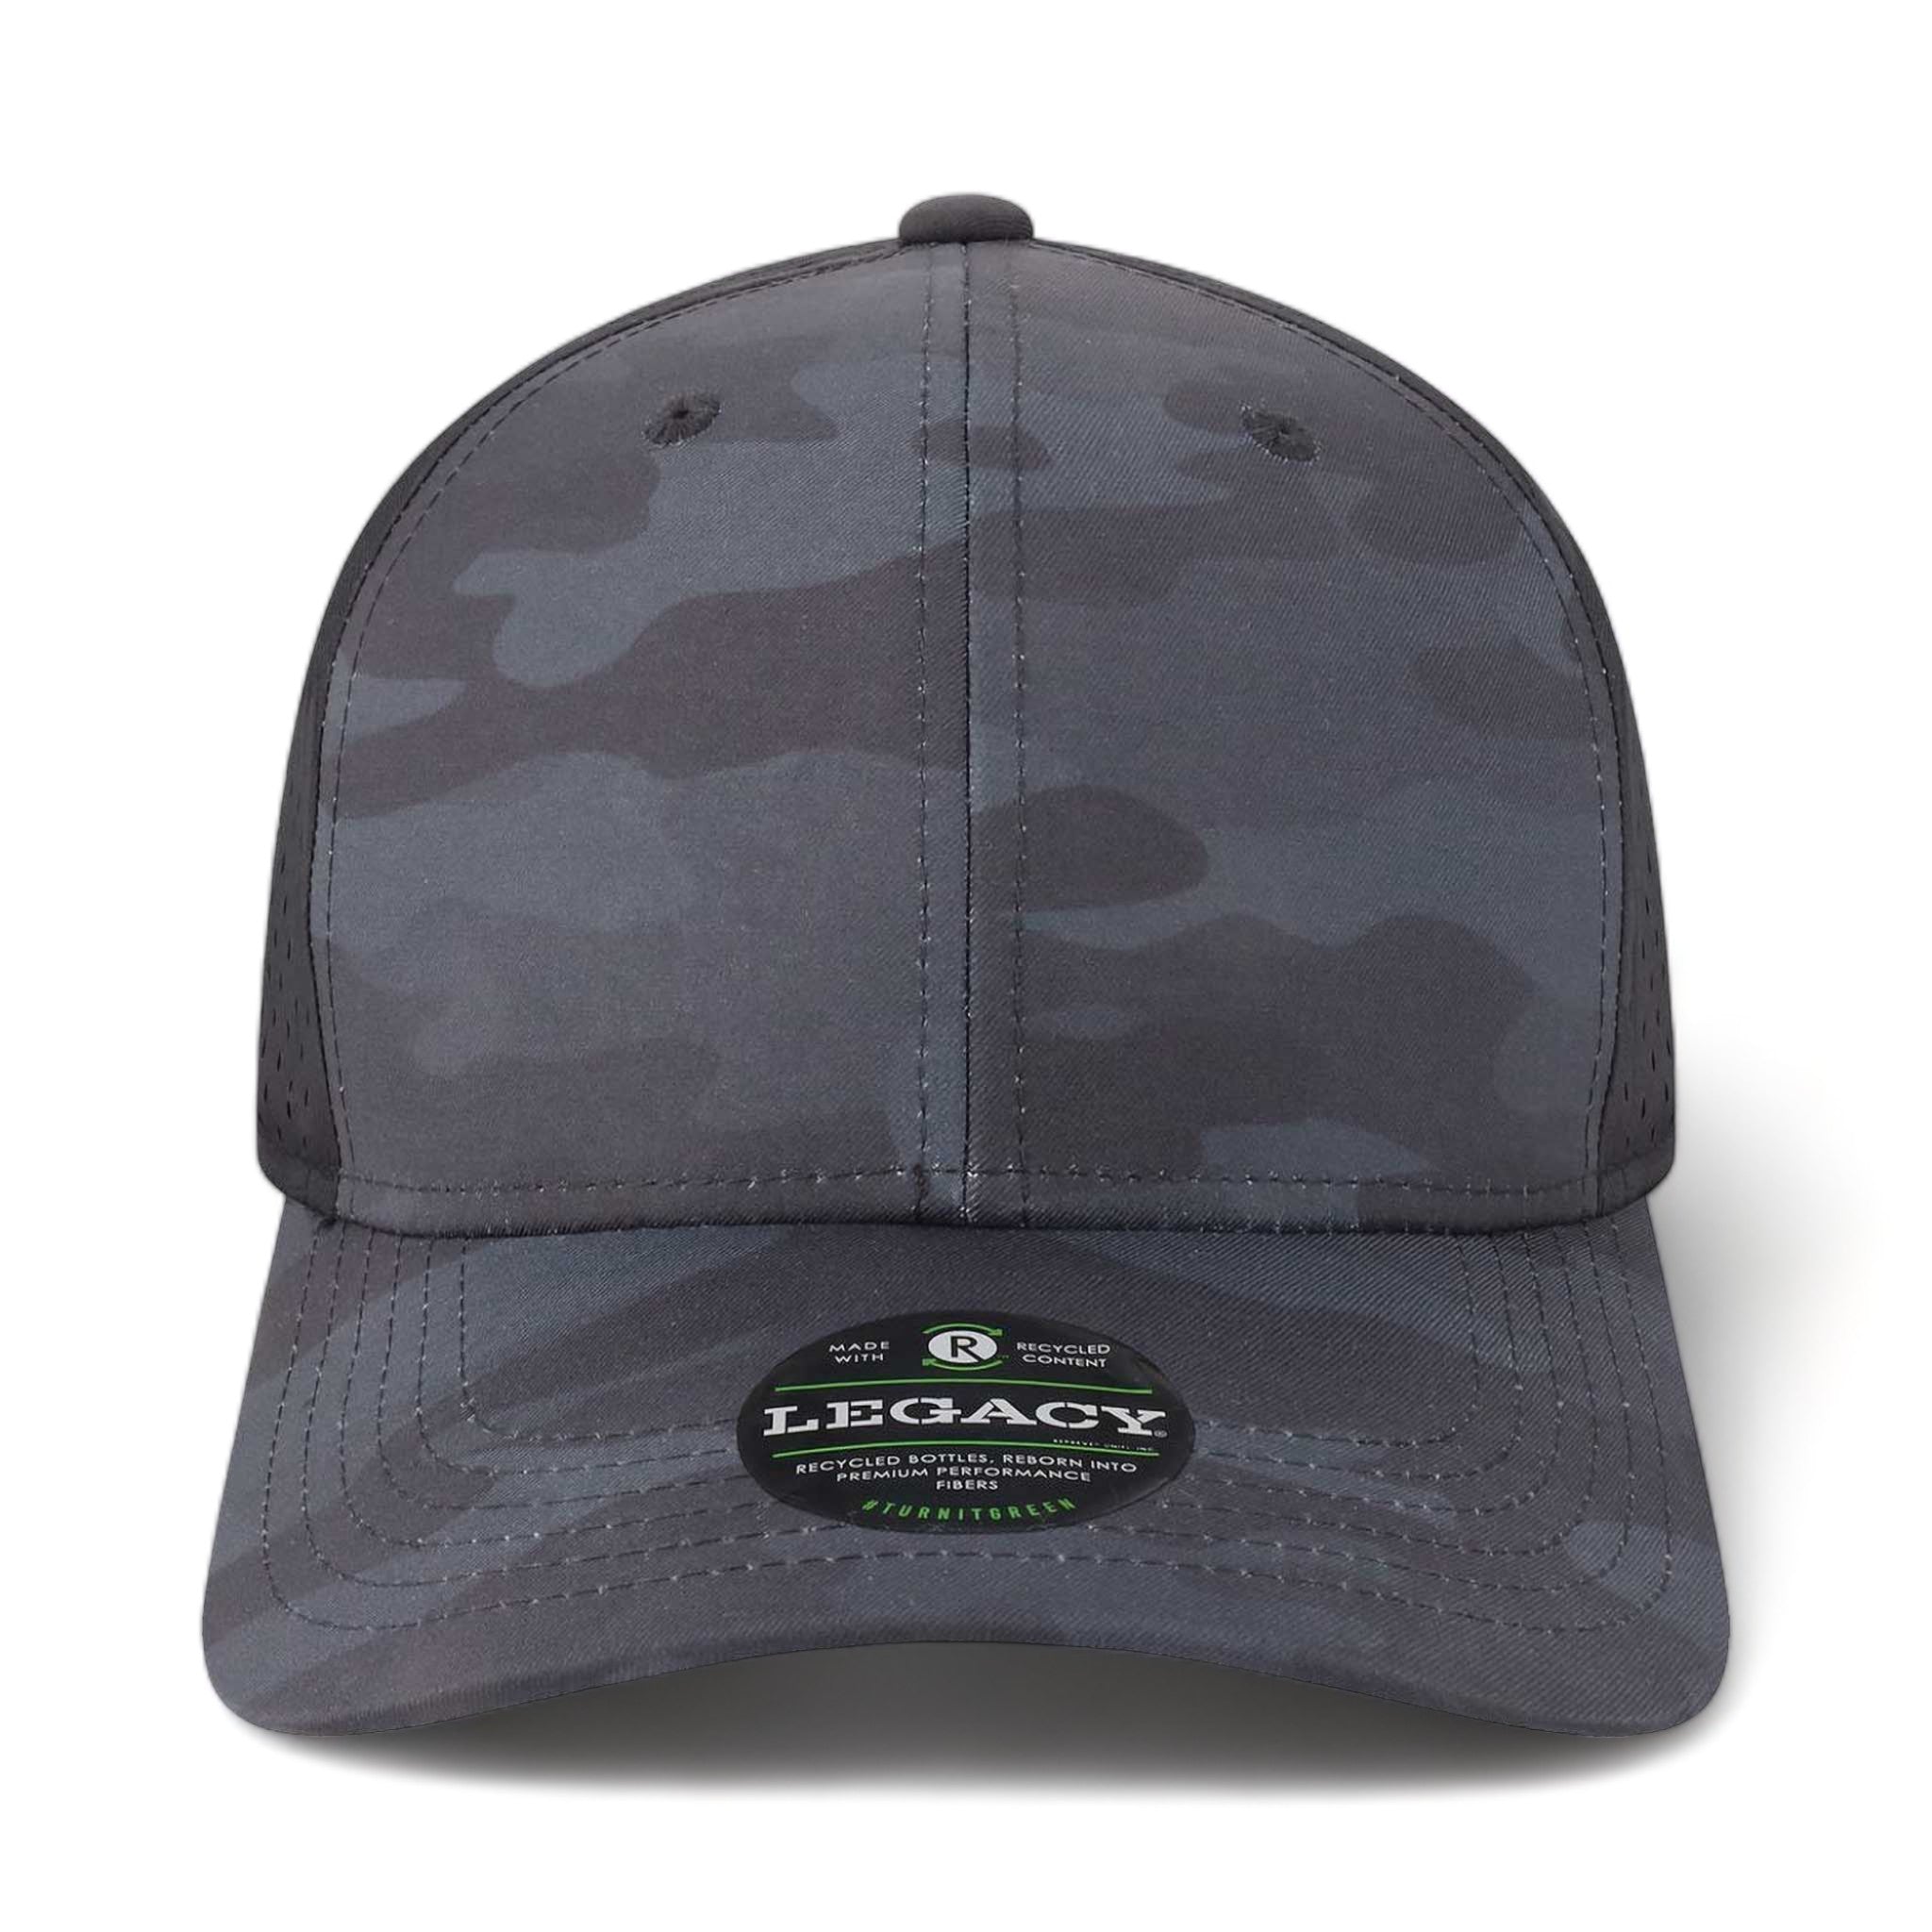 Front view of LEGACY REMPA custom hat in black camo